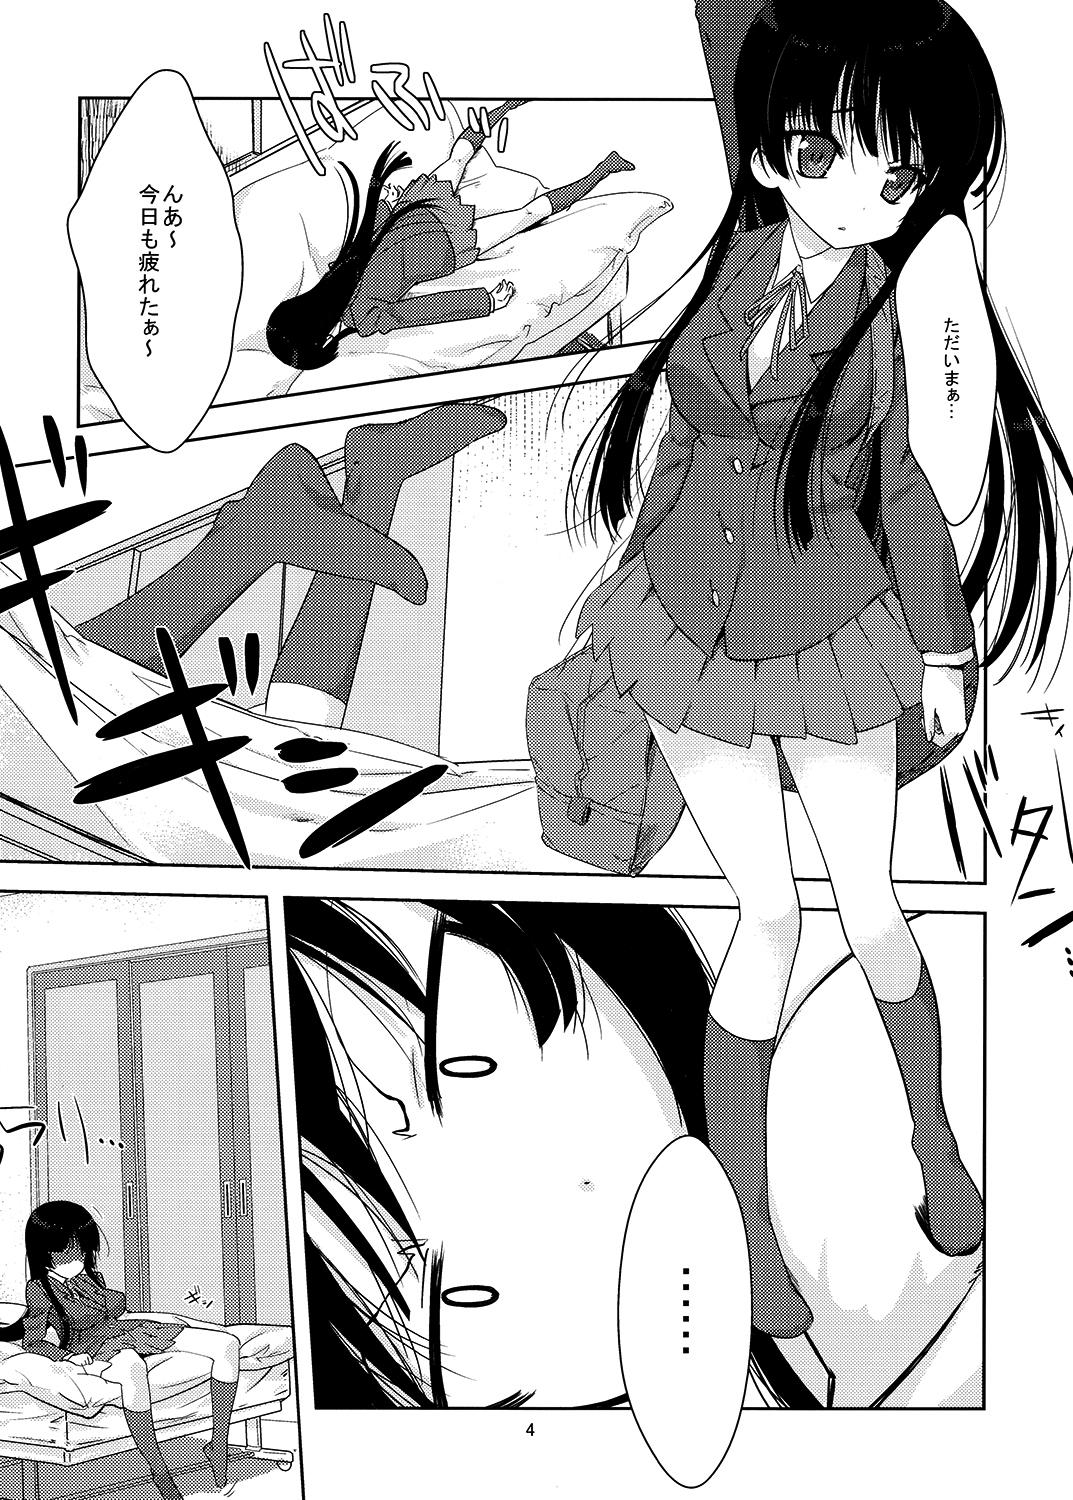 Lovers Mio-tan! - K on Bubble Butt - Page 3